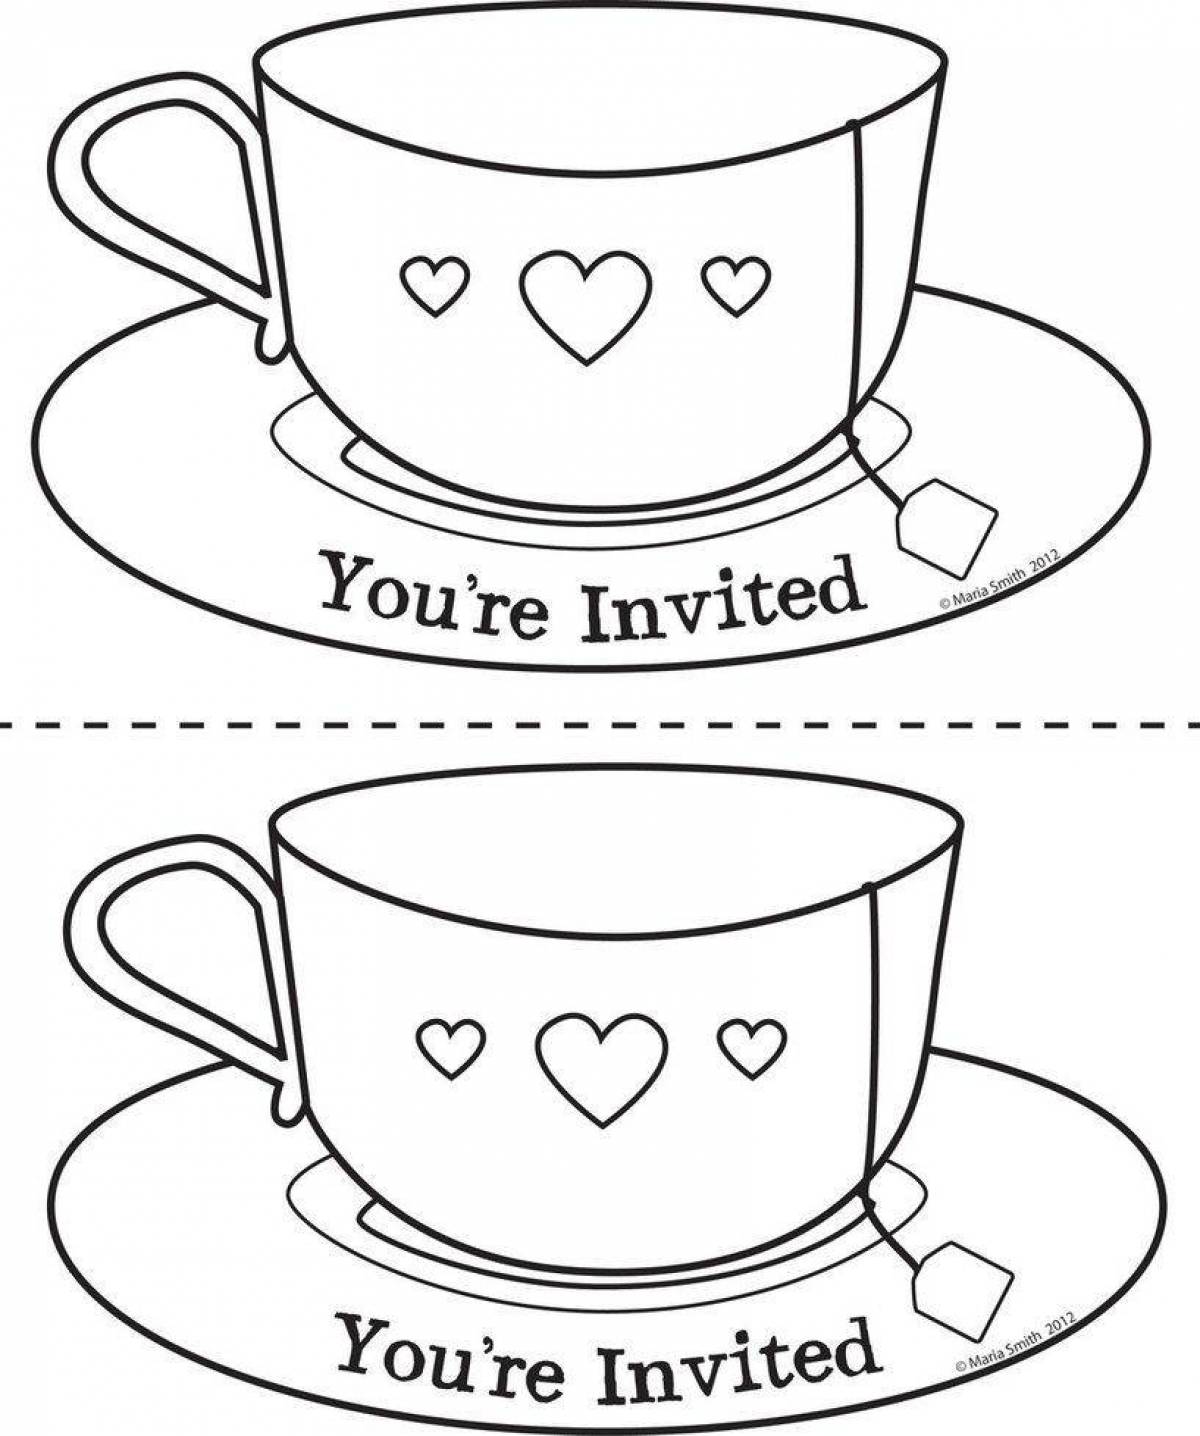 Colouring bright cup and saucer